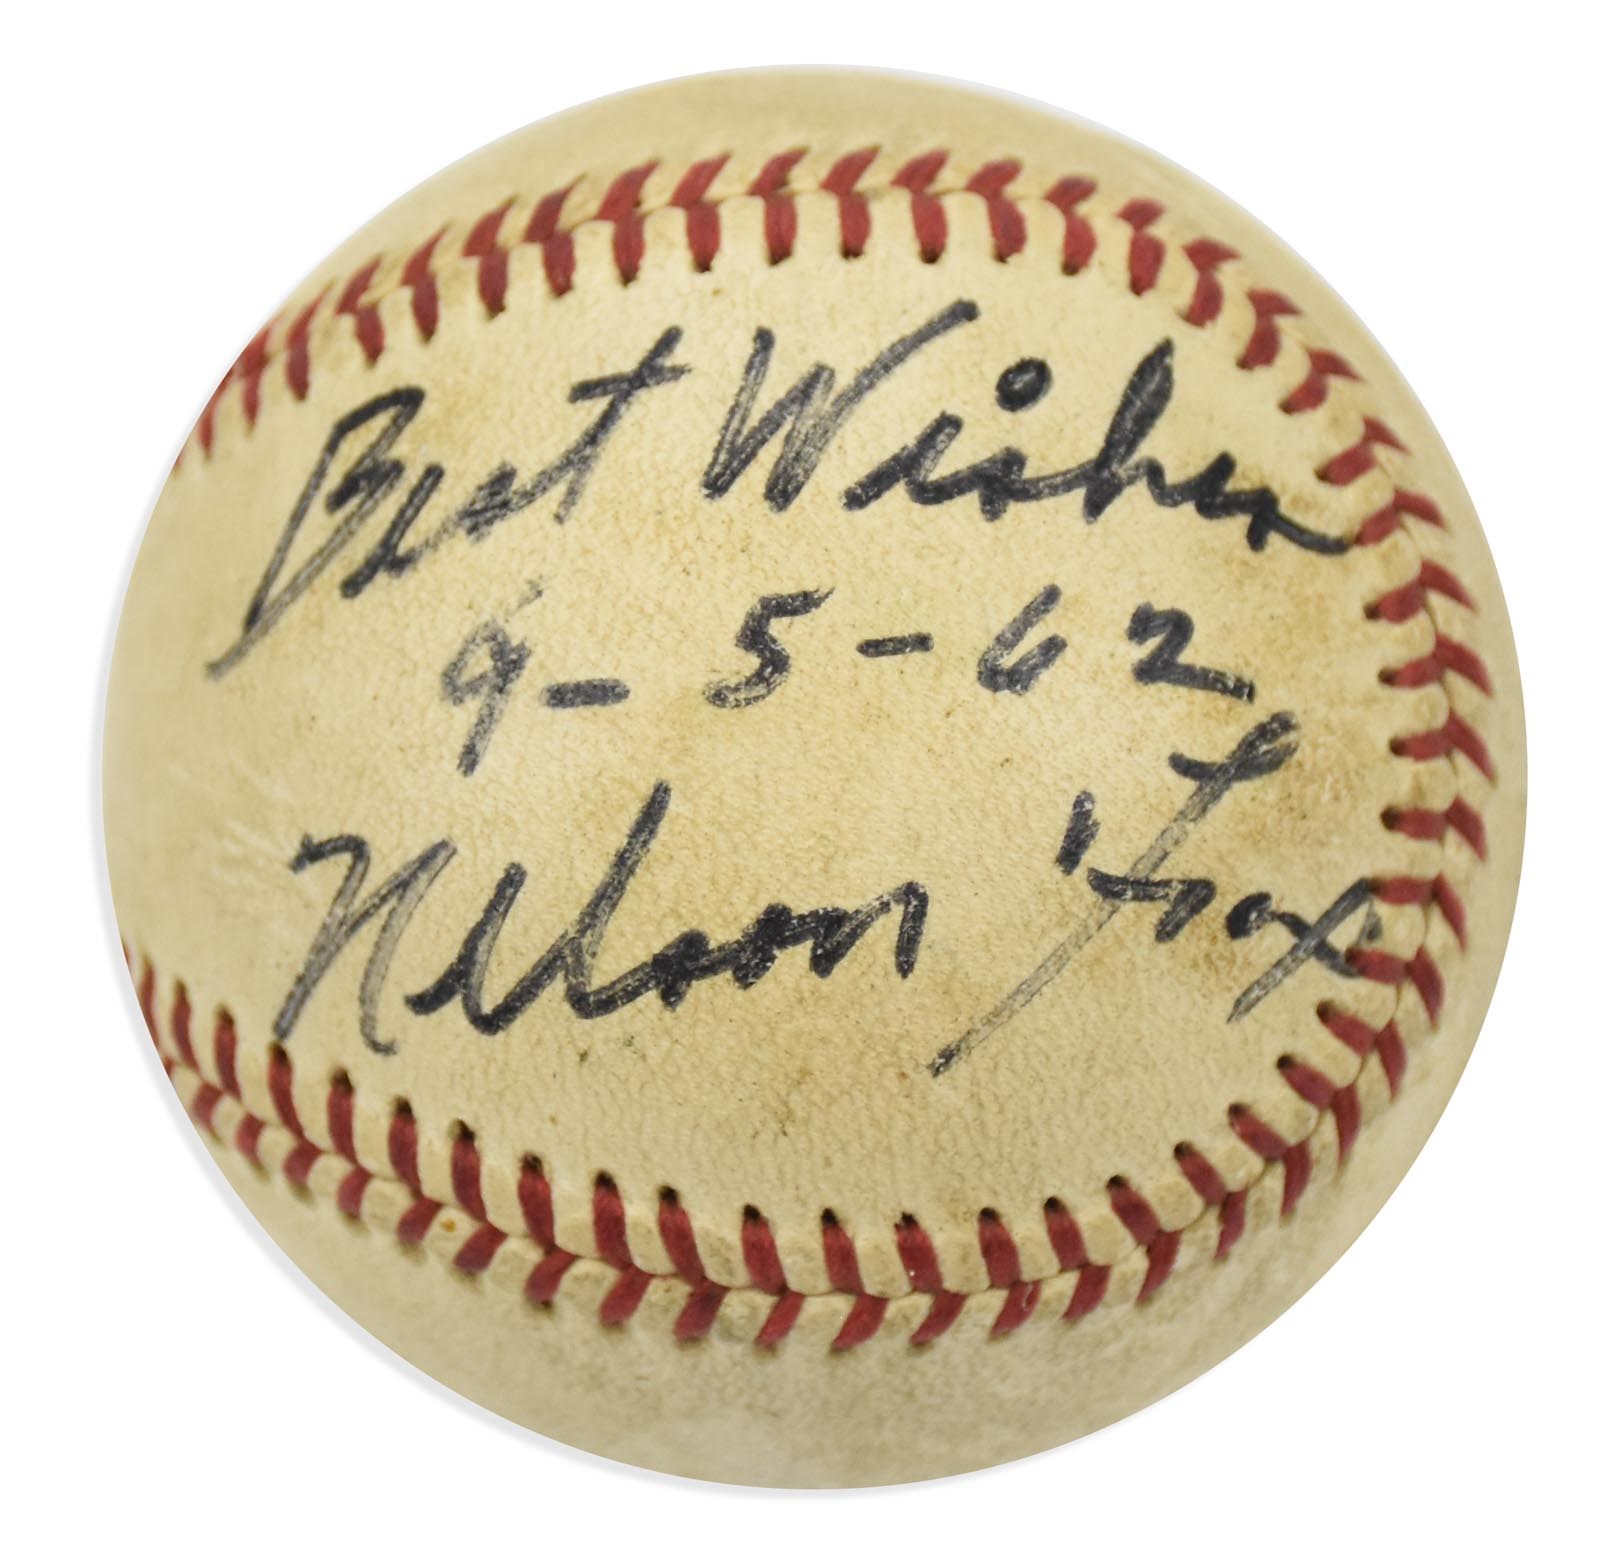 - 9/5/62 Nellie Fox Single Signed Game Used Baseball - with Game Ticket (PSA)